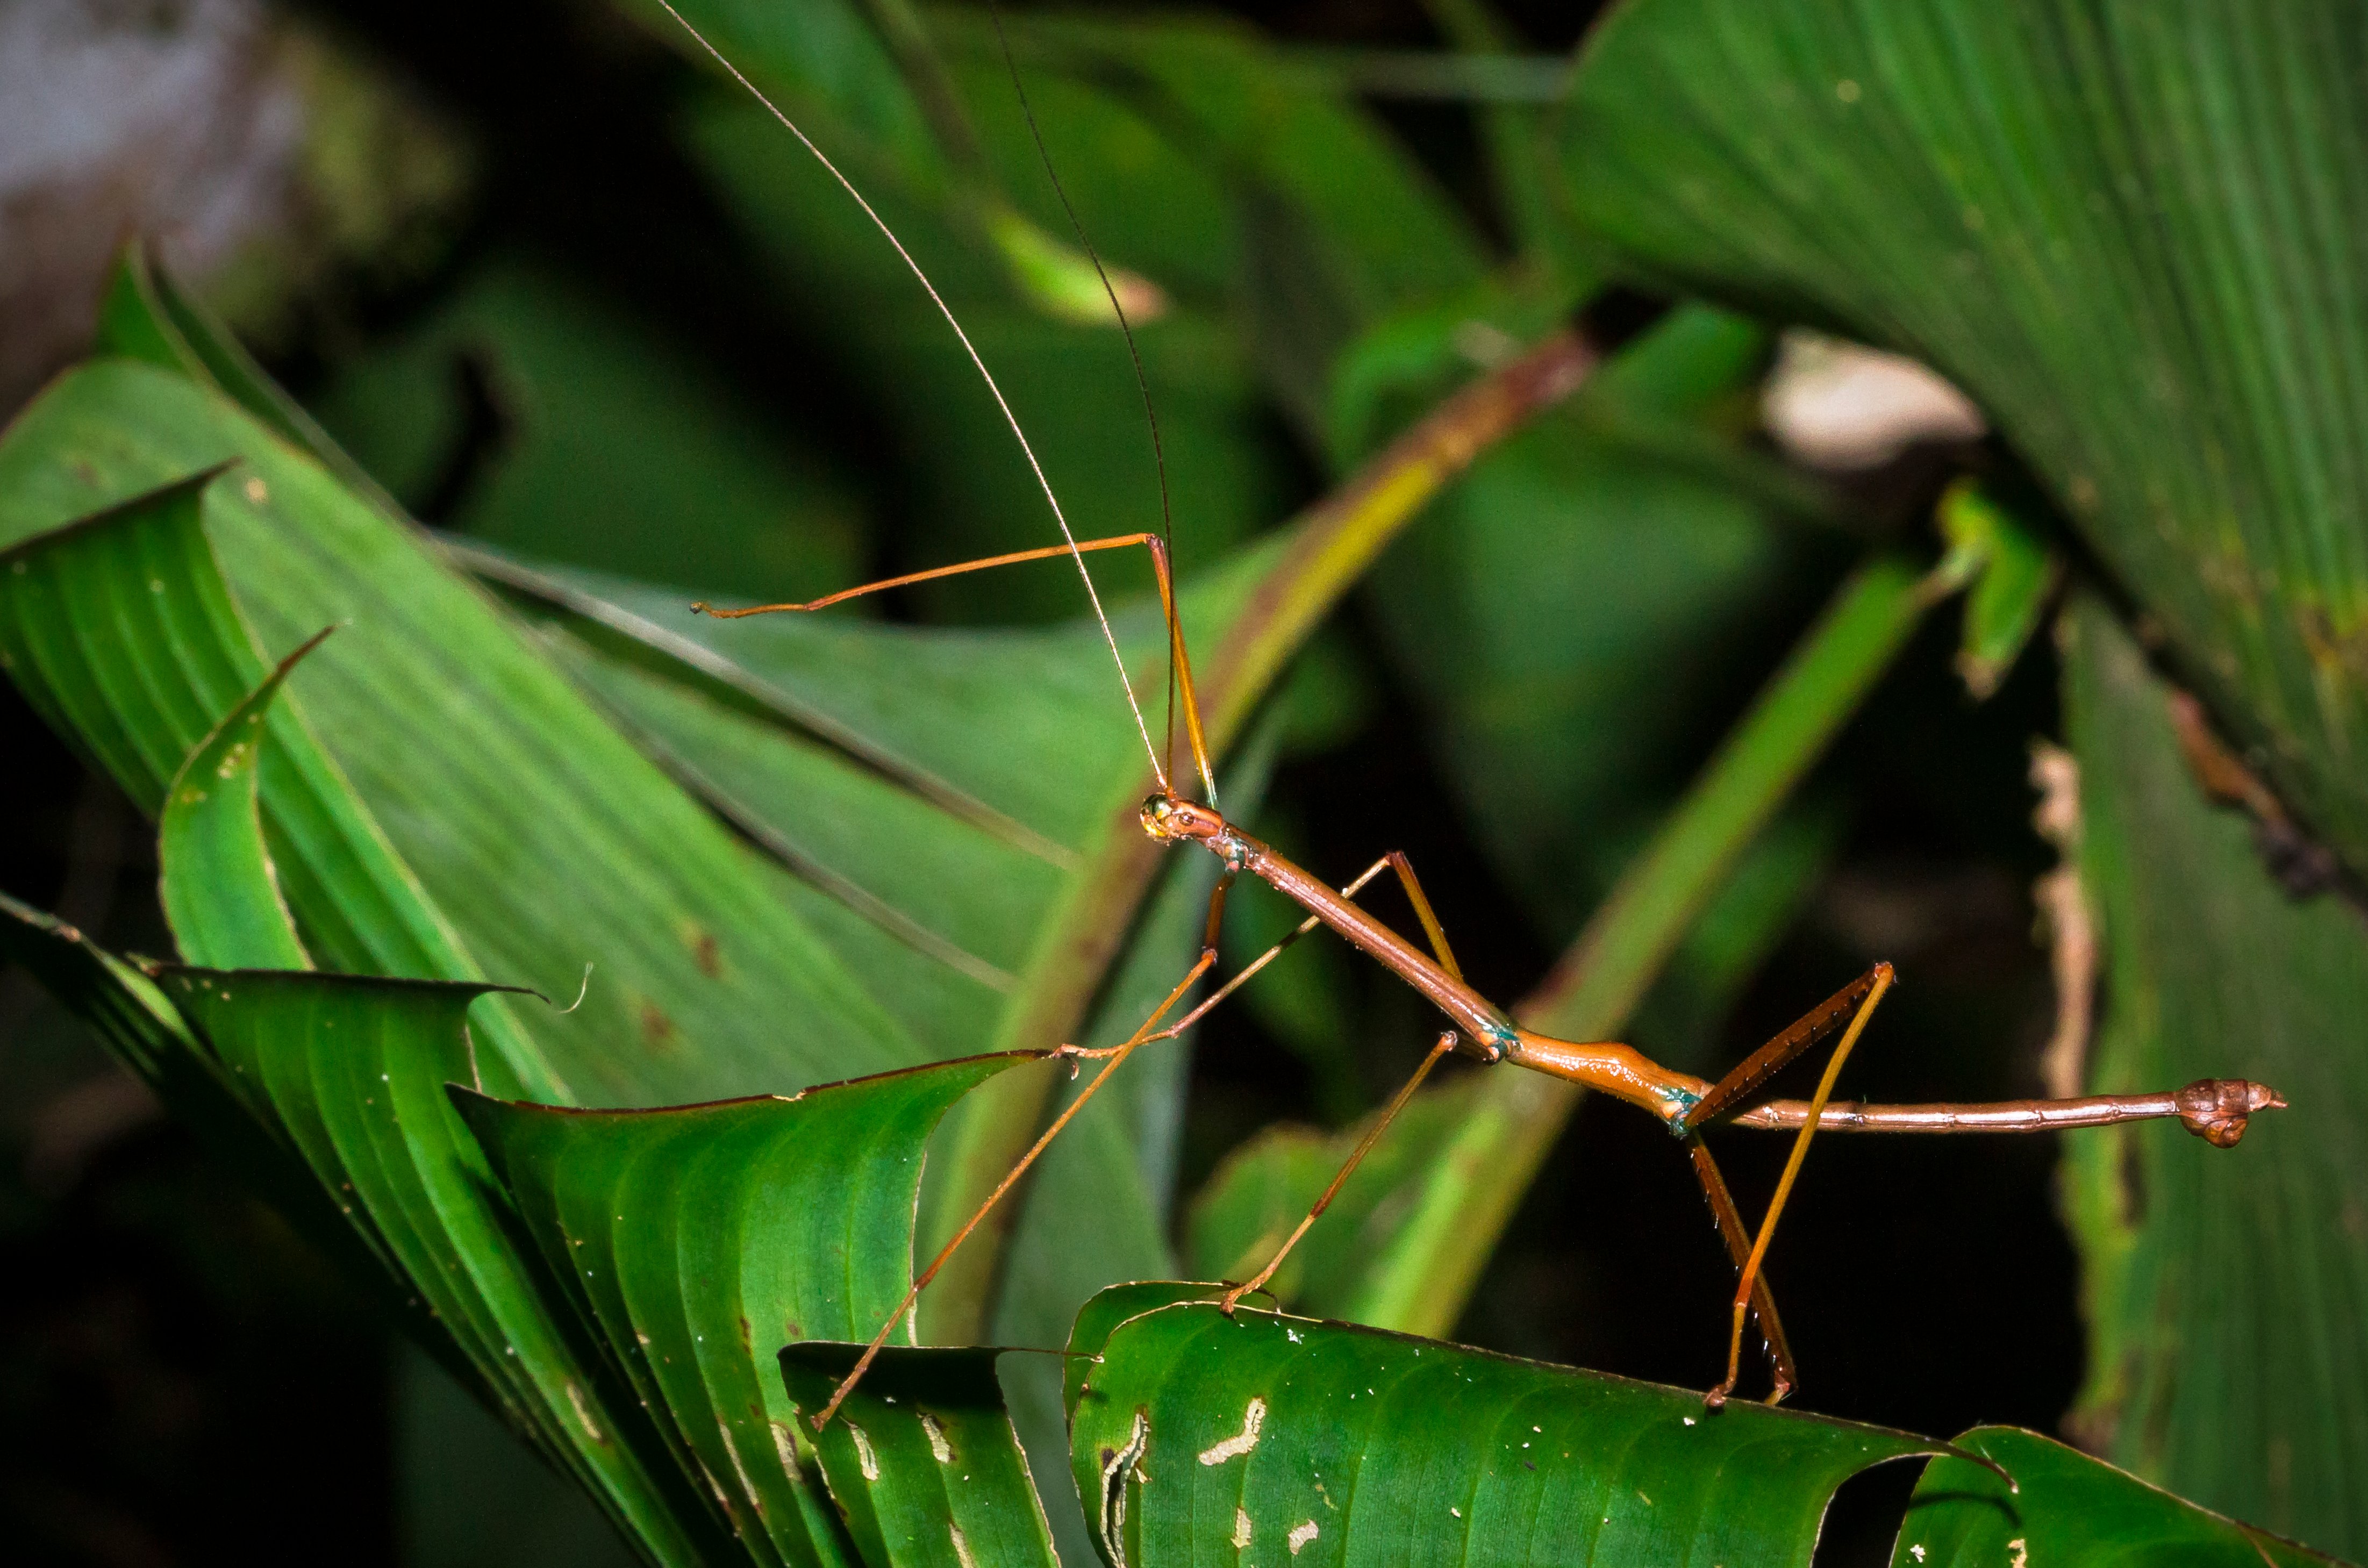 stick-insect-on-a-leaf-at-night-in-costa-rica-2021-08-30-02-28-50-utc